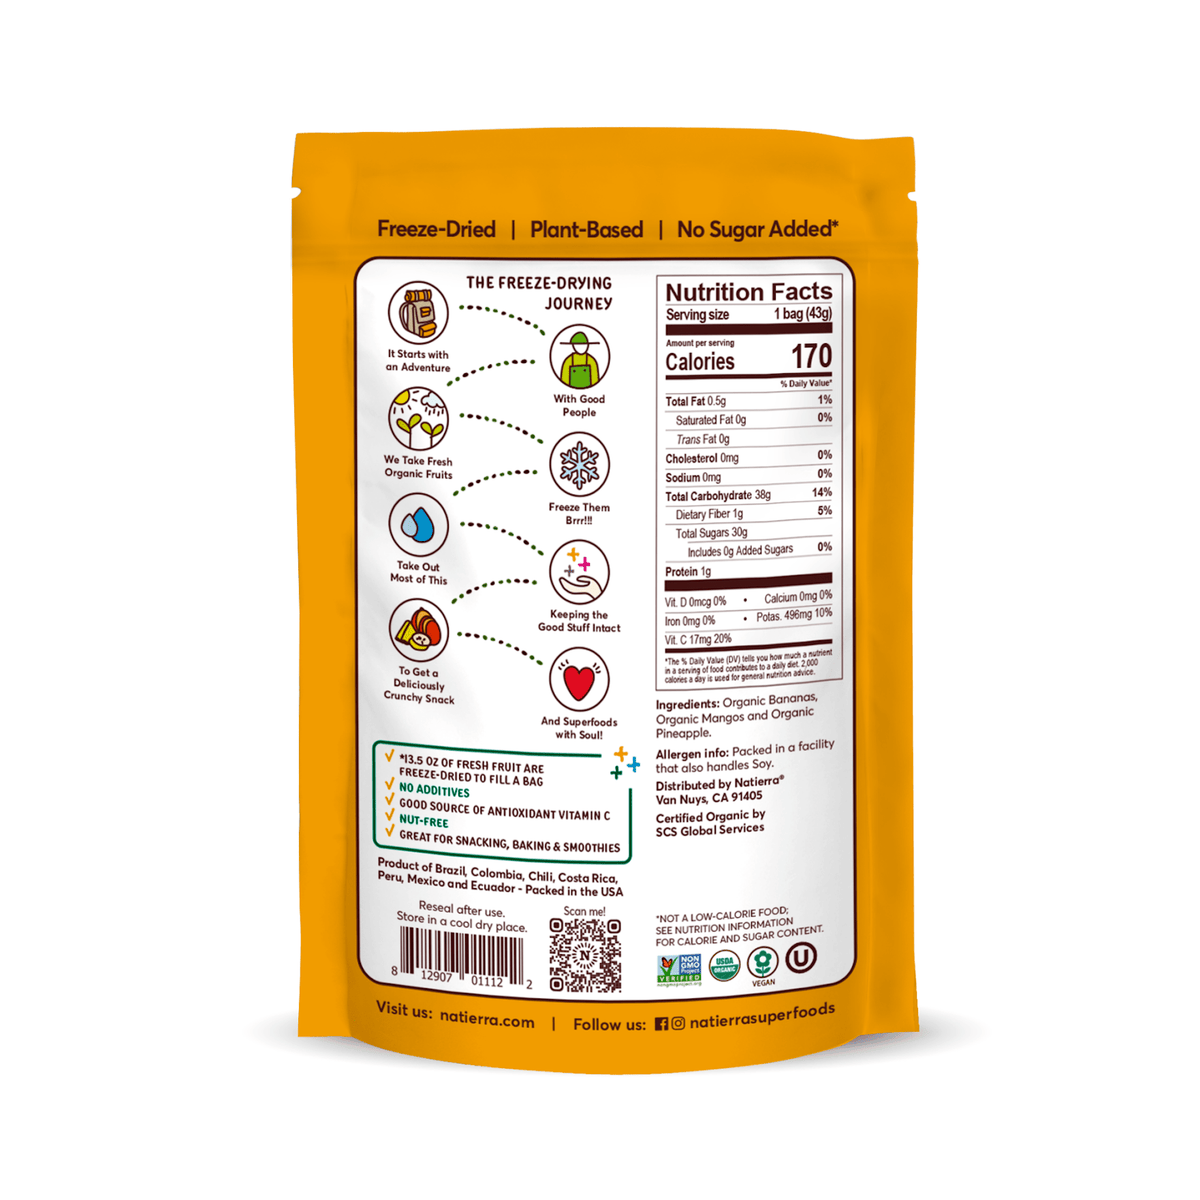 Natierra Organic Freeze-Dried Tropical Fruits bag with Nutrition facts, journey and main product claims